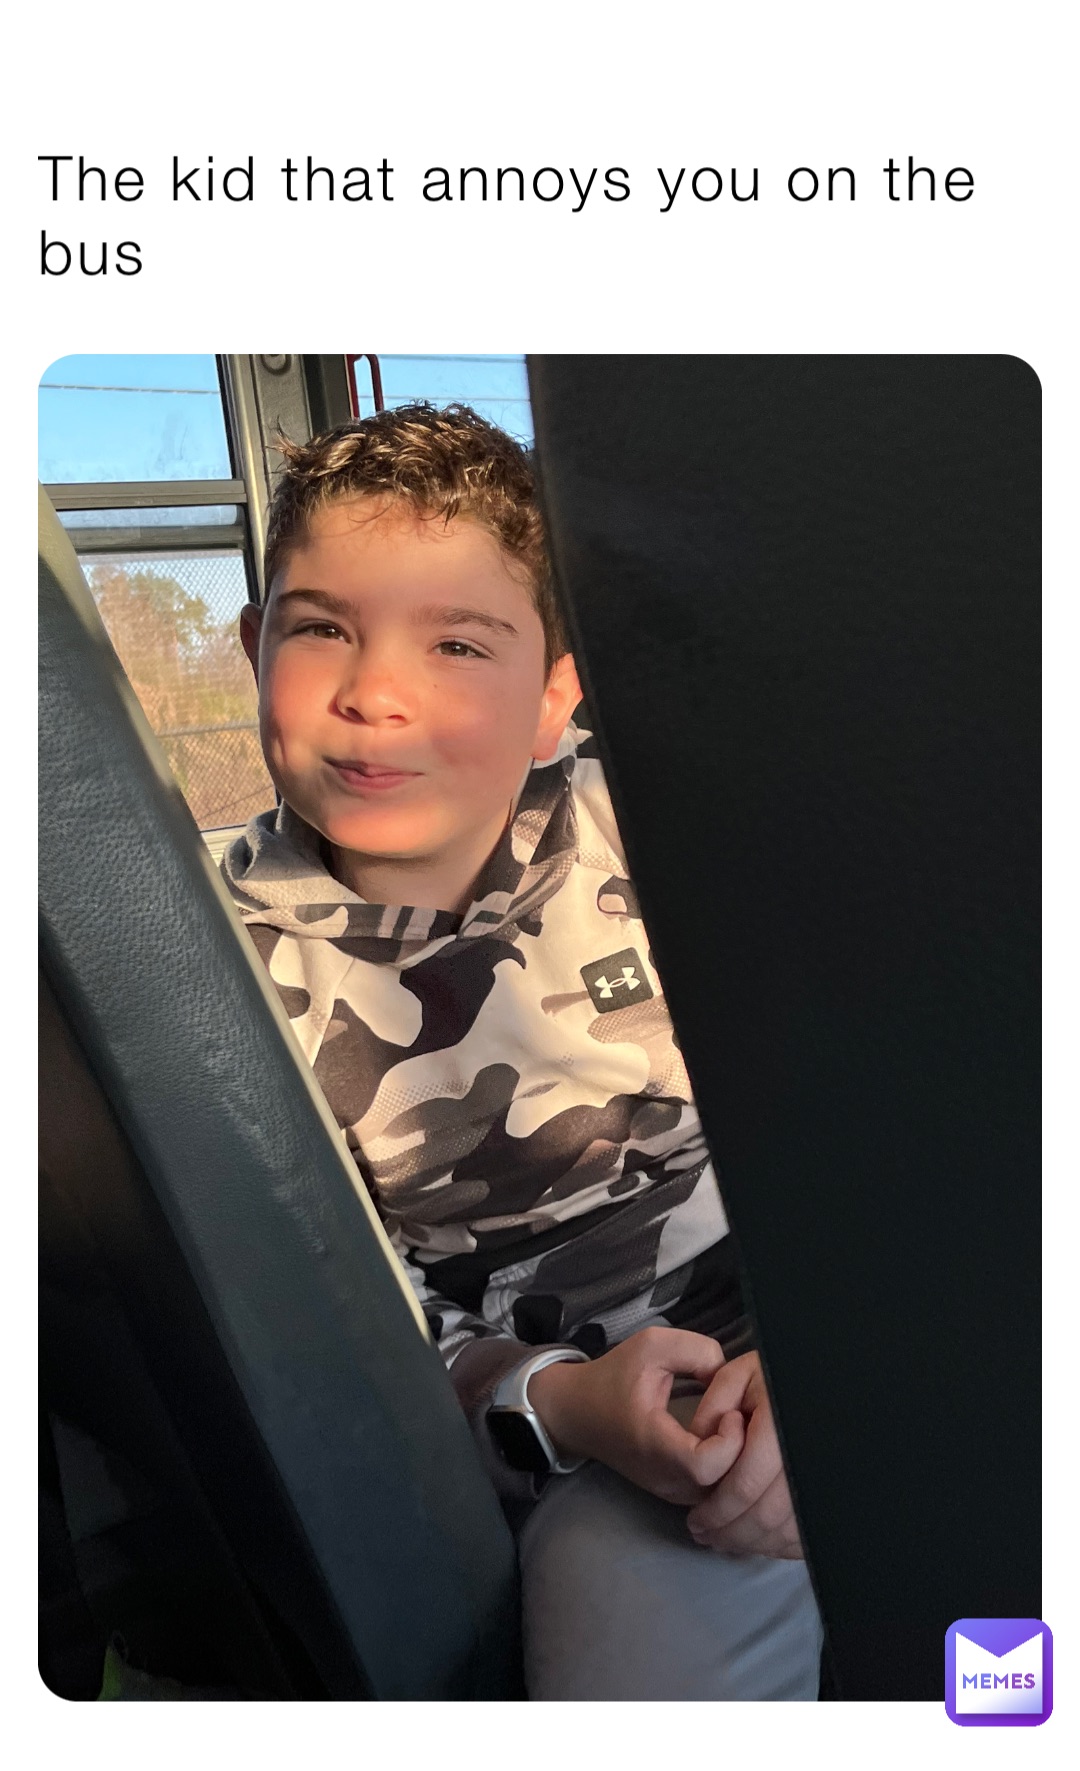 The kid that annoys you on the bus